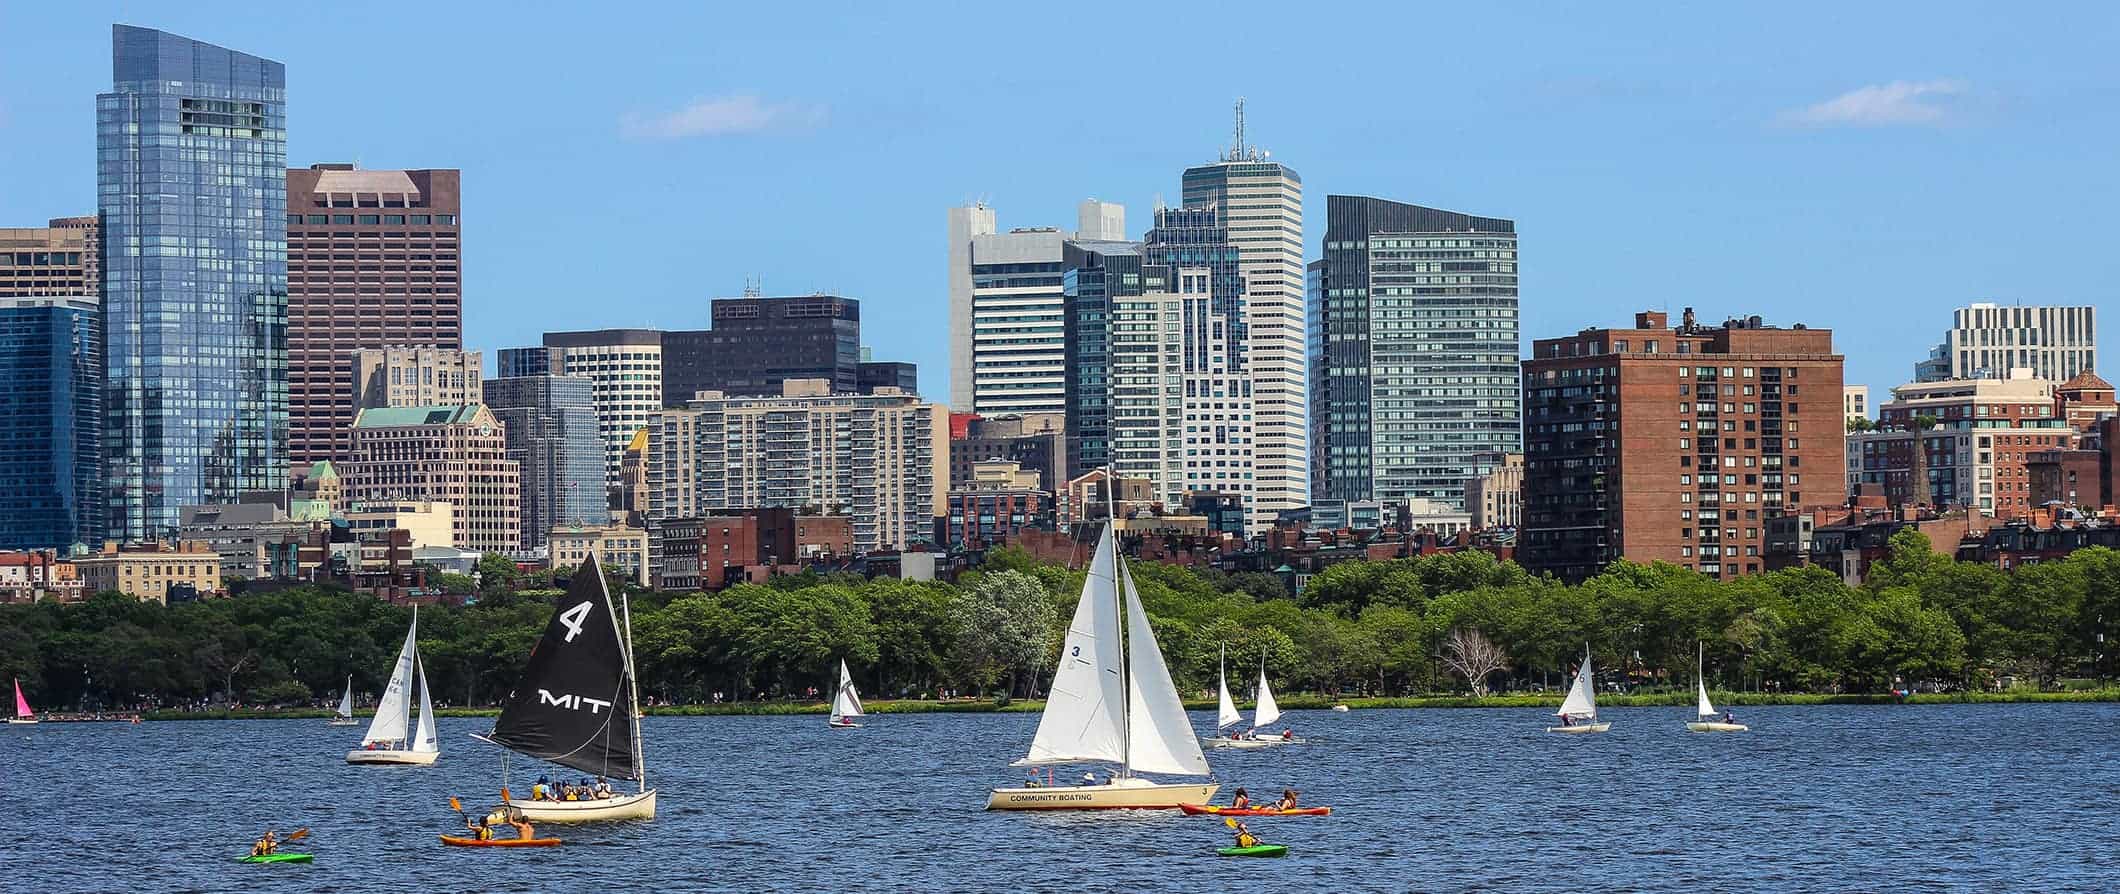 Boston Travel Guide: What to See, Do, Costs, &  Ways to Save